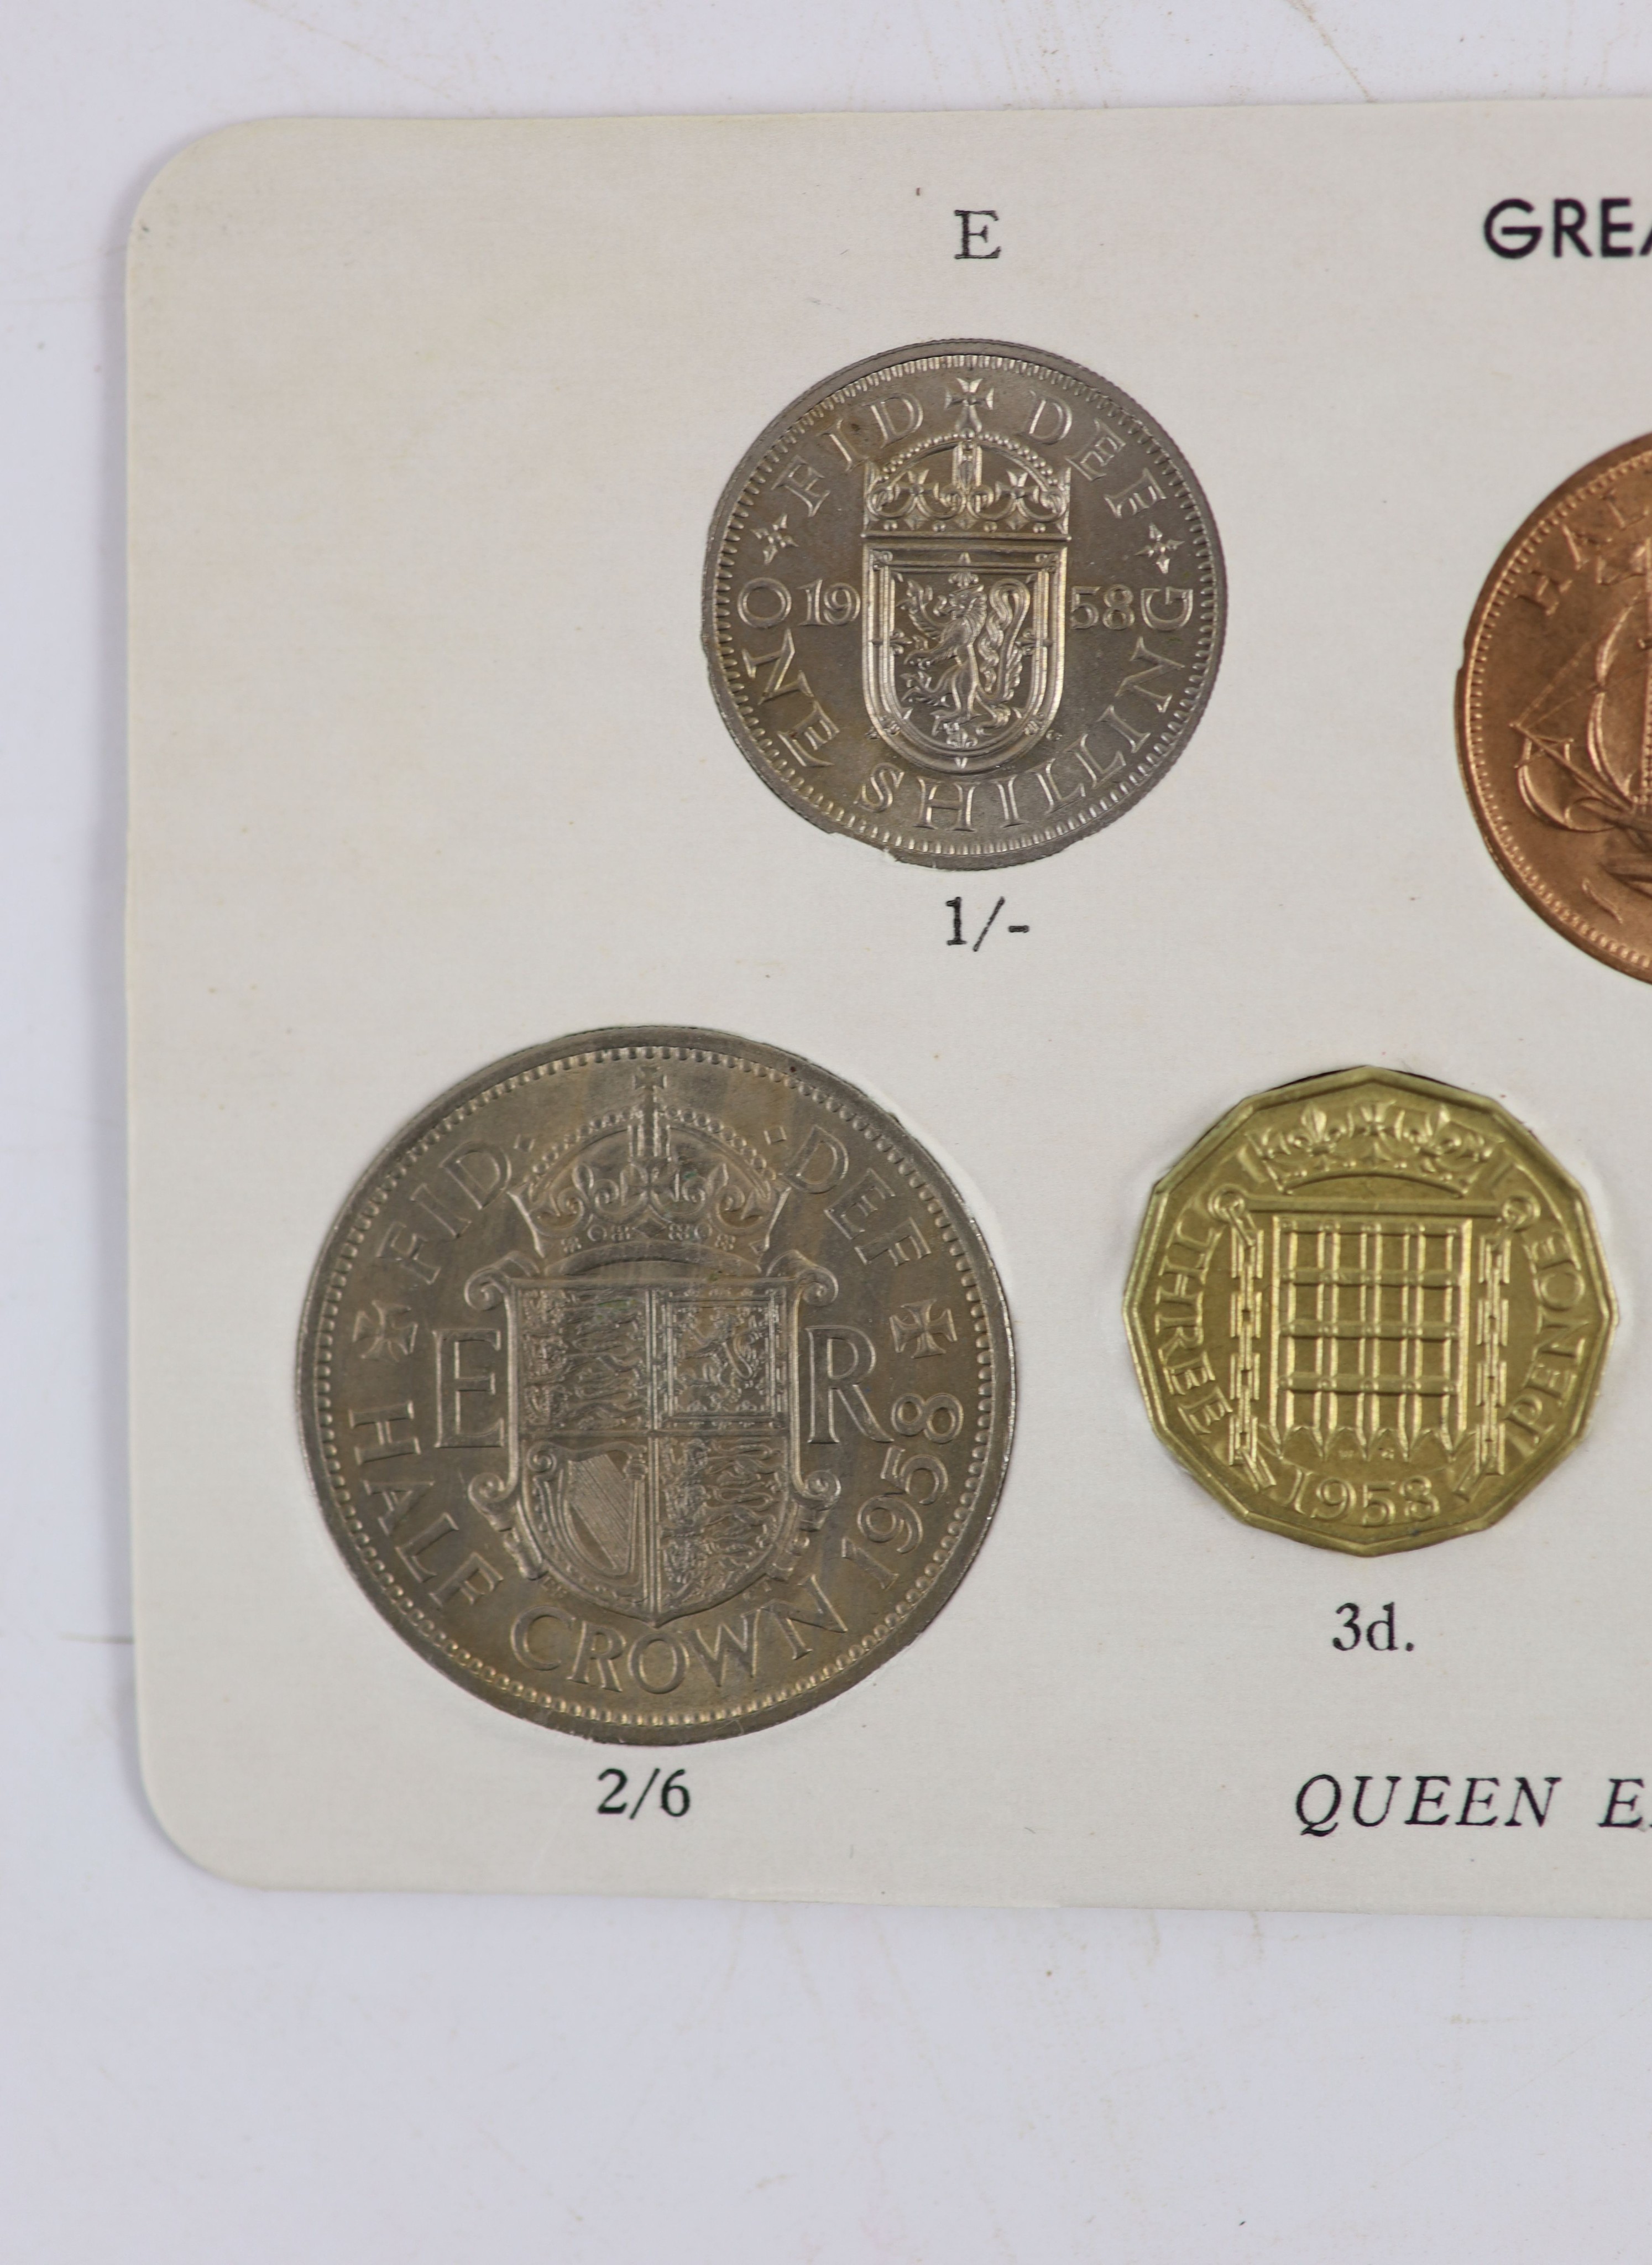 Queen Elizabeth II pre-decimal specimen coin sets for 1953 - 1967, first and second issues, all EF/ - Image 32 of 34